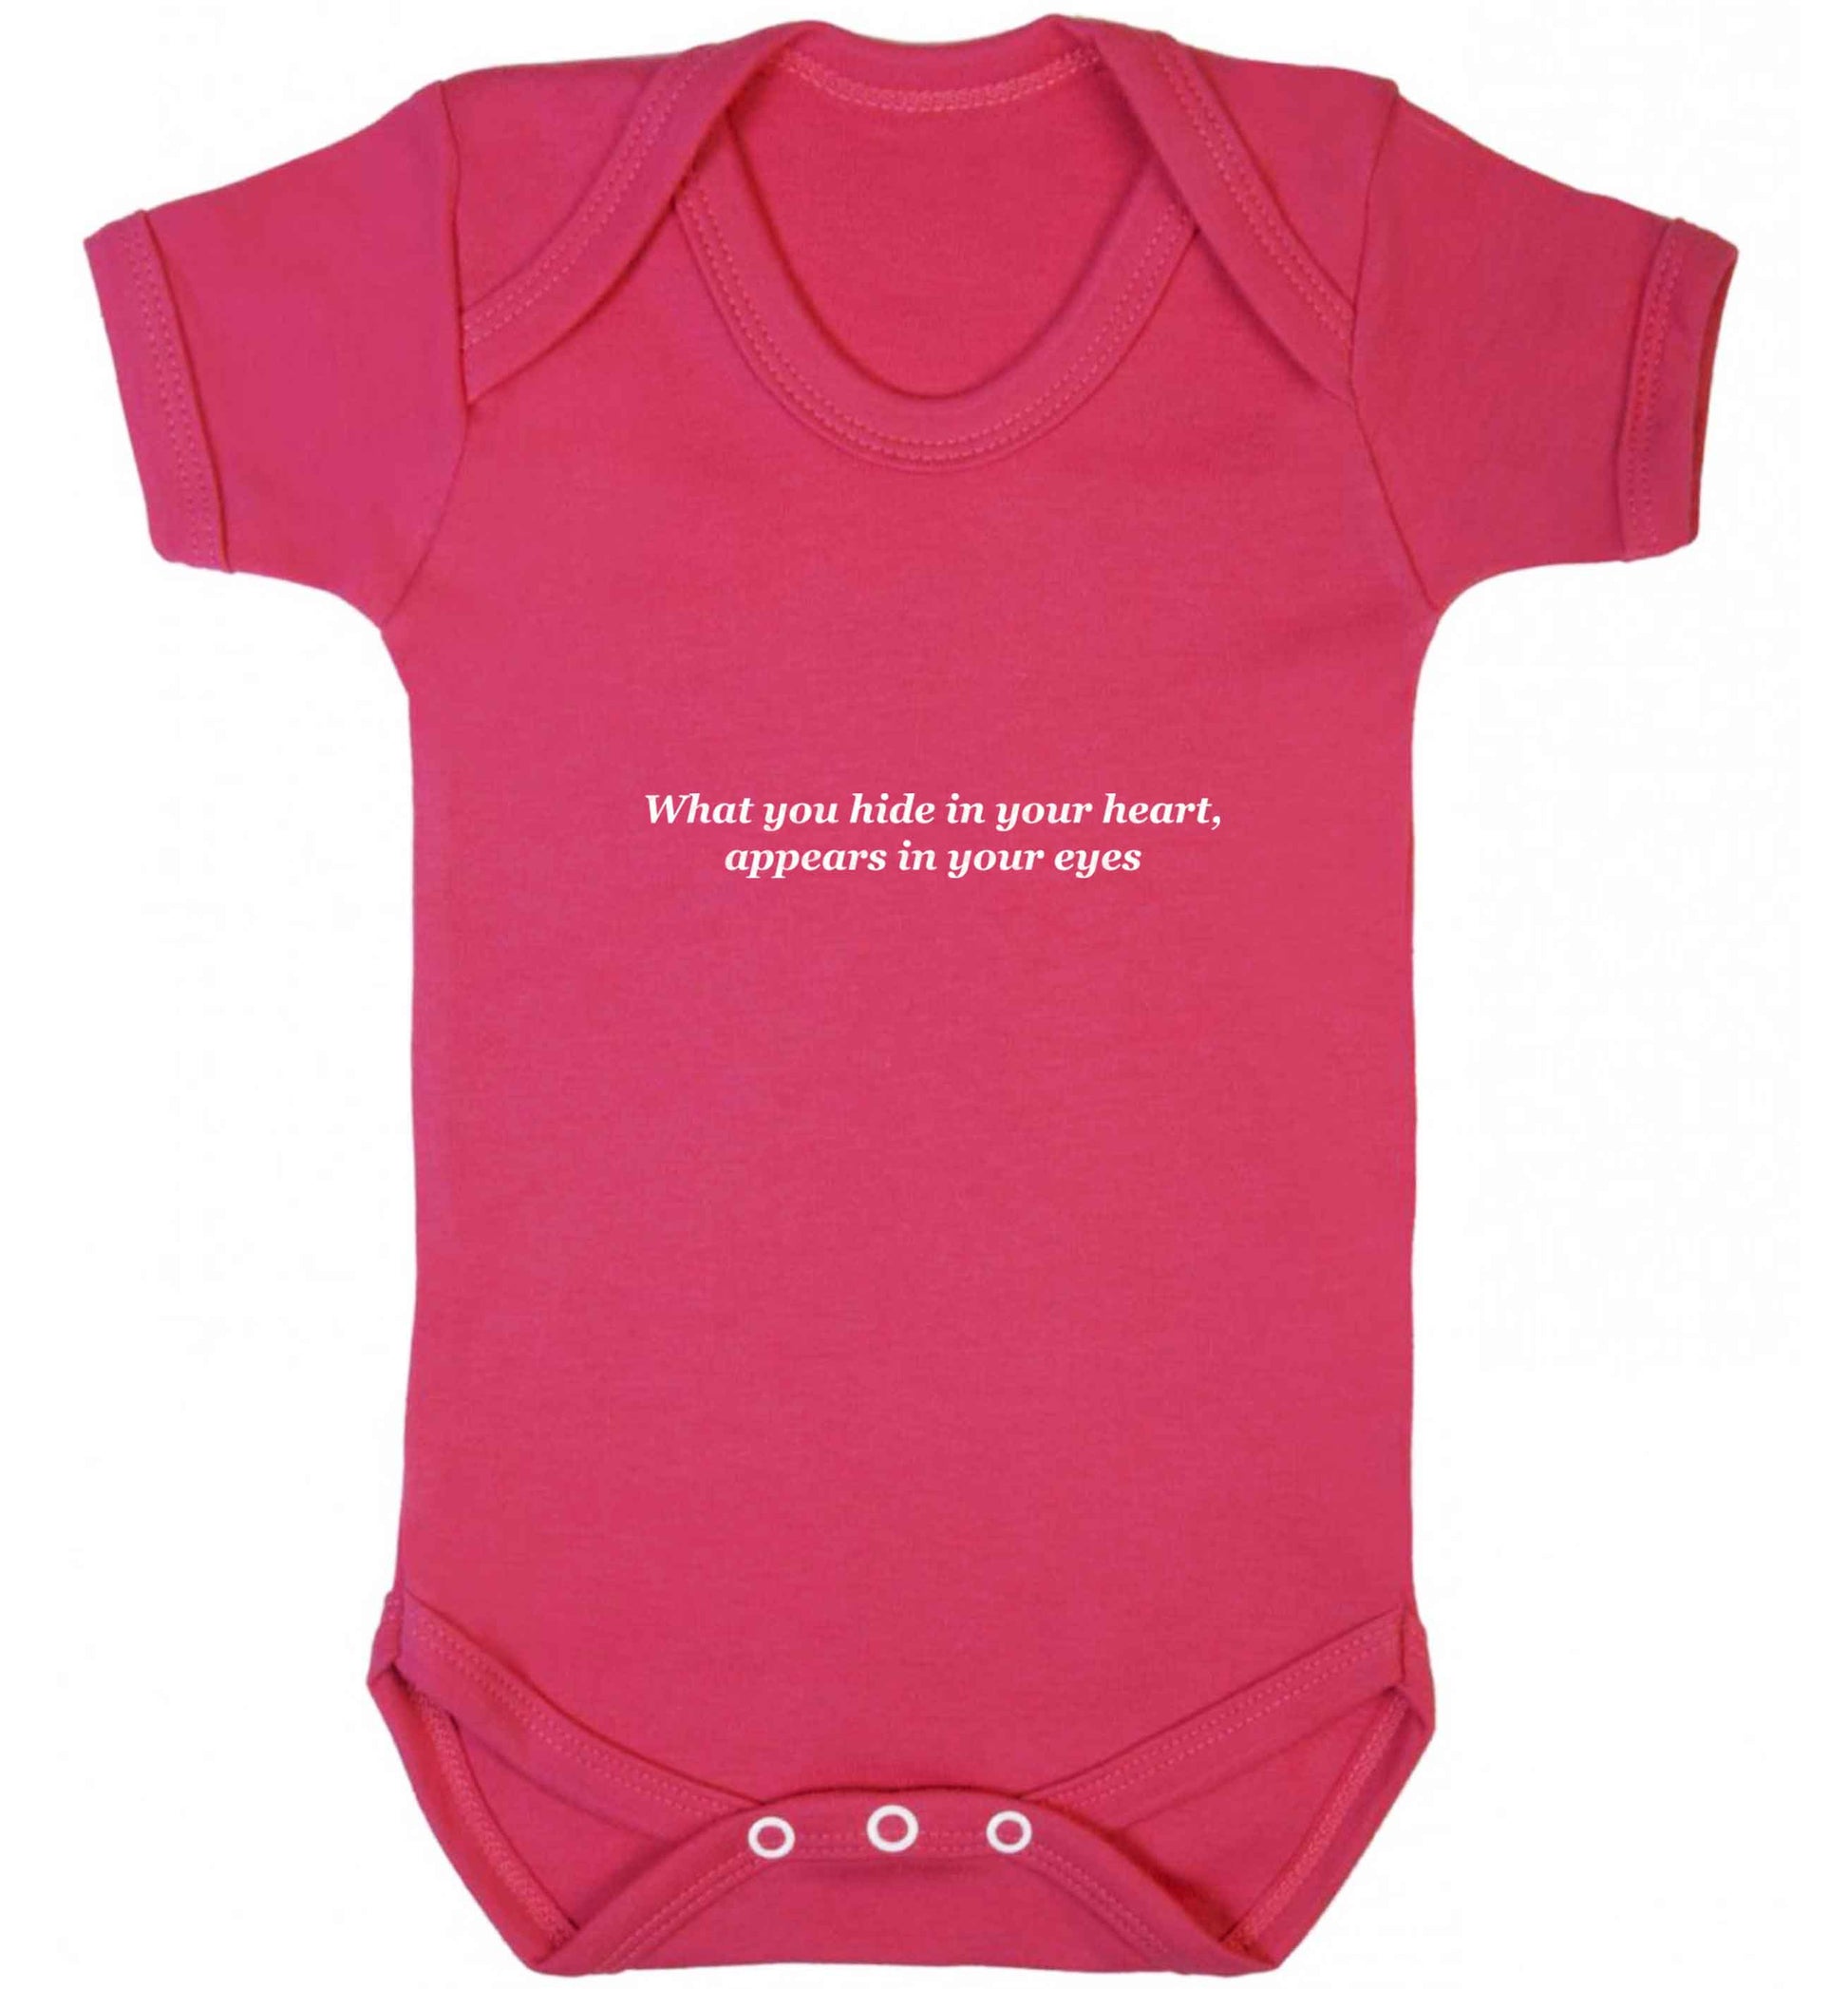 What you hide in your heart, appears in your eyes baby vest dark pink 18-24 months